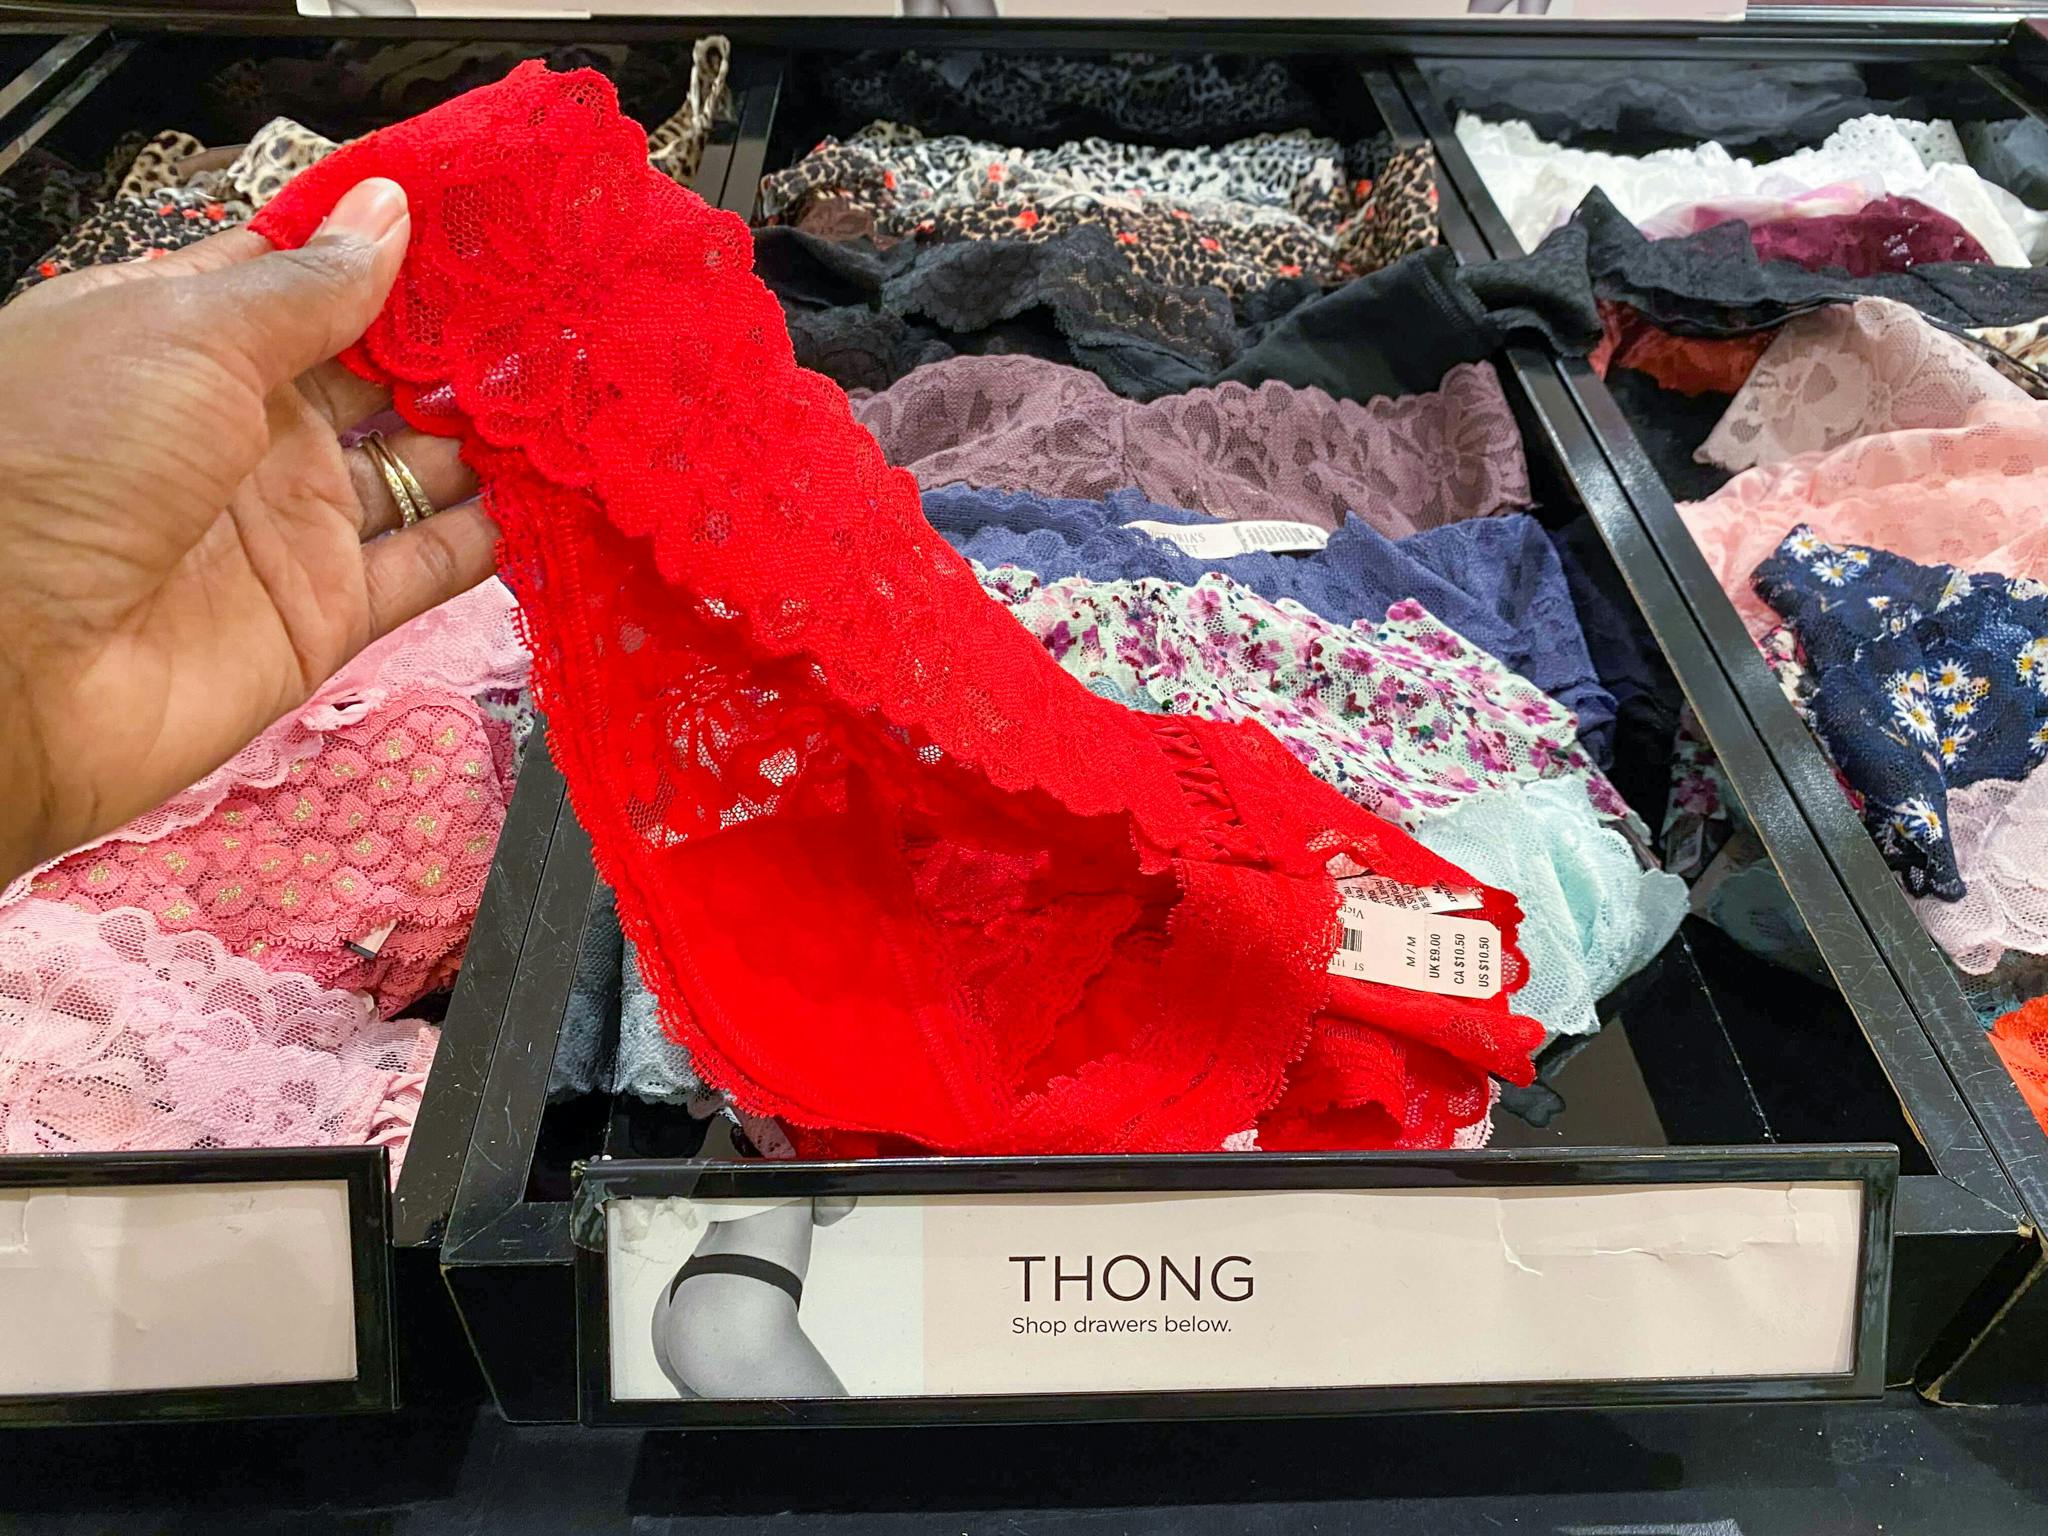 A person's hand picking up a lacy pair of underwear from a display at Victoria's Secret.